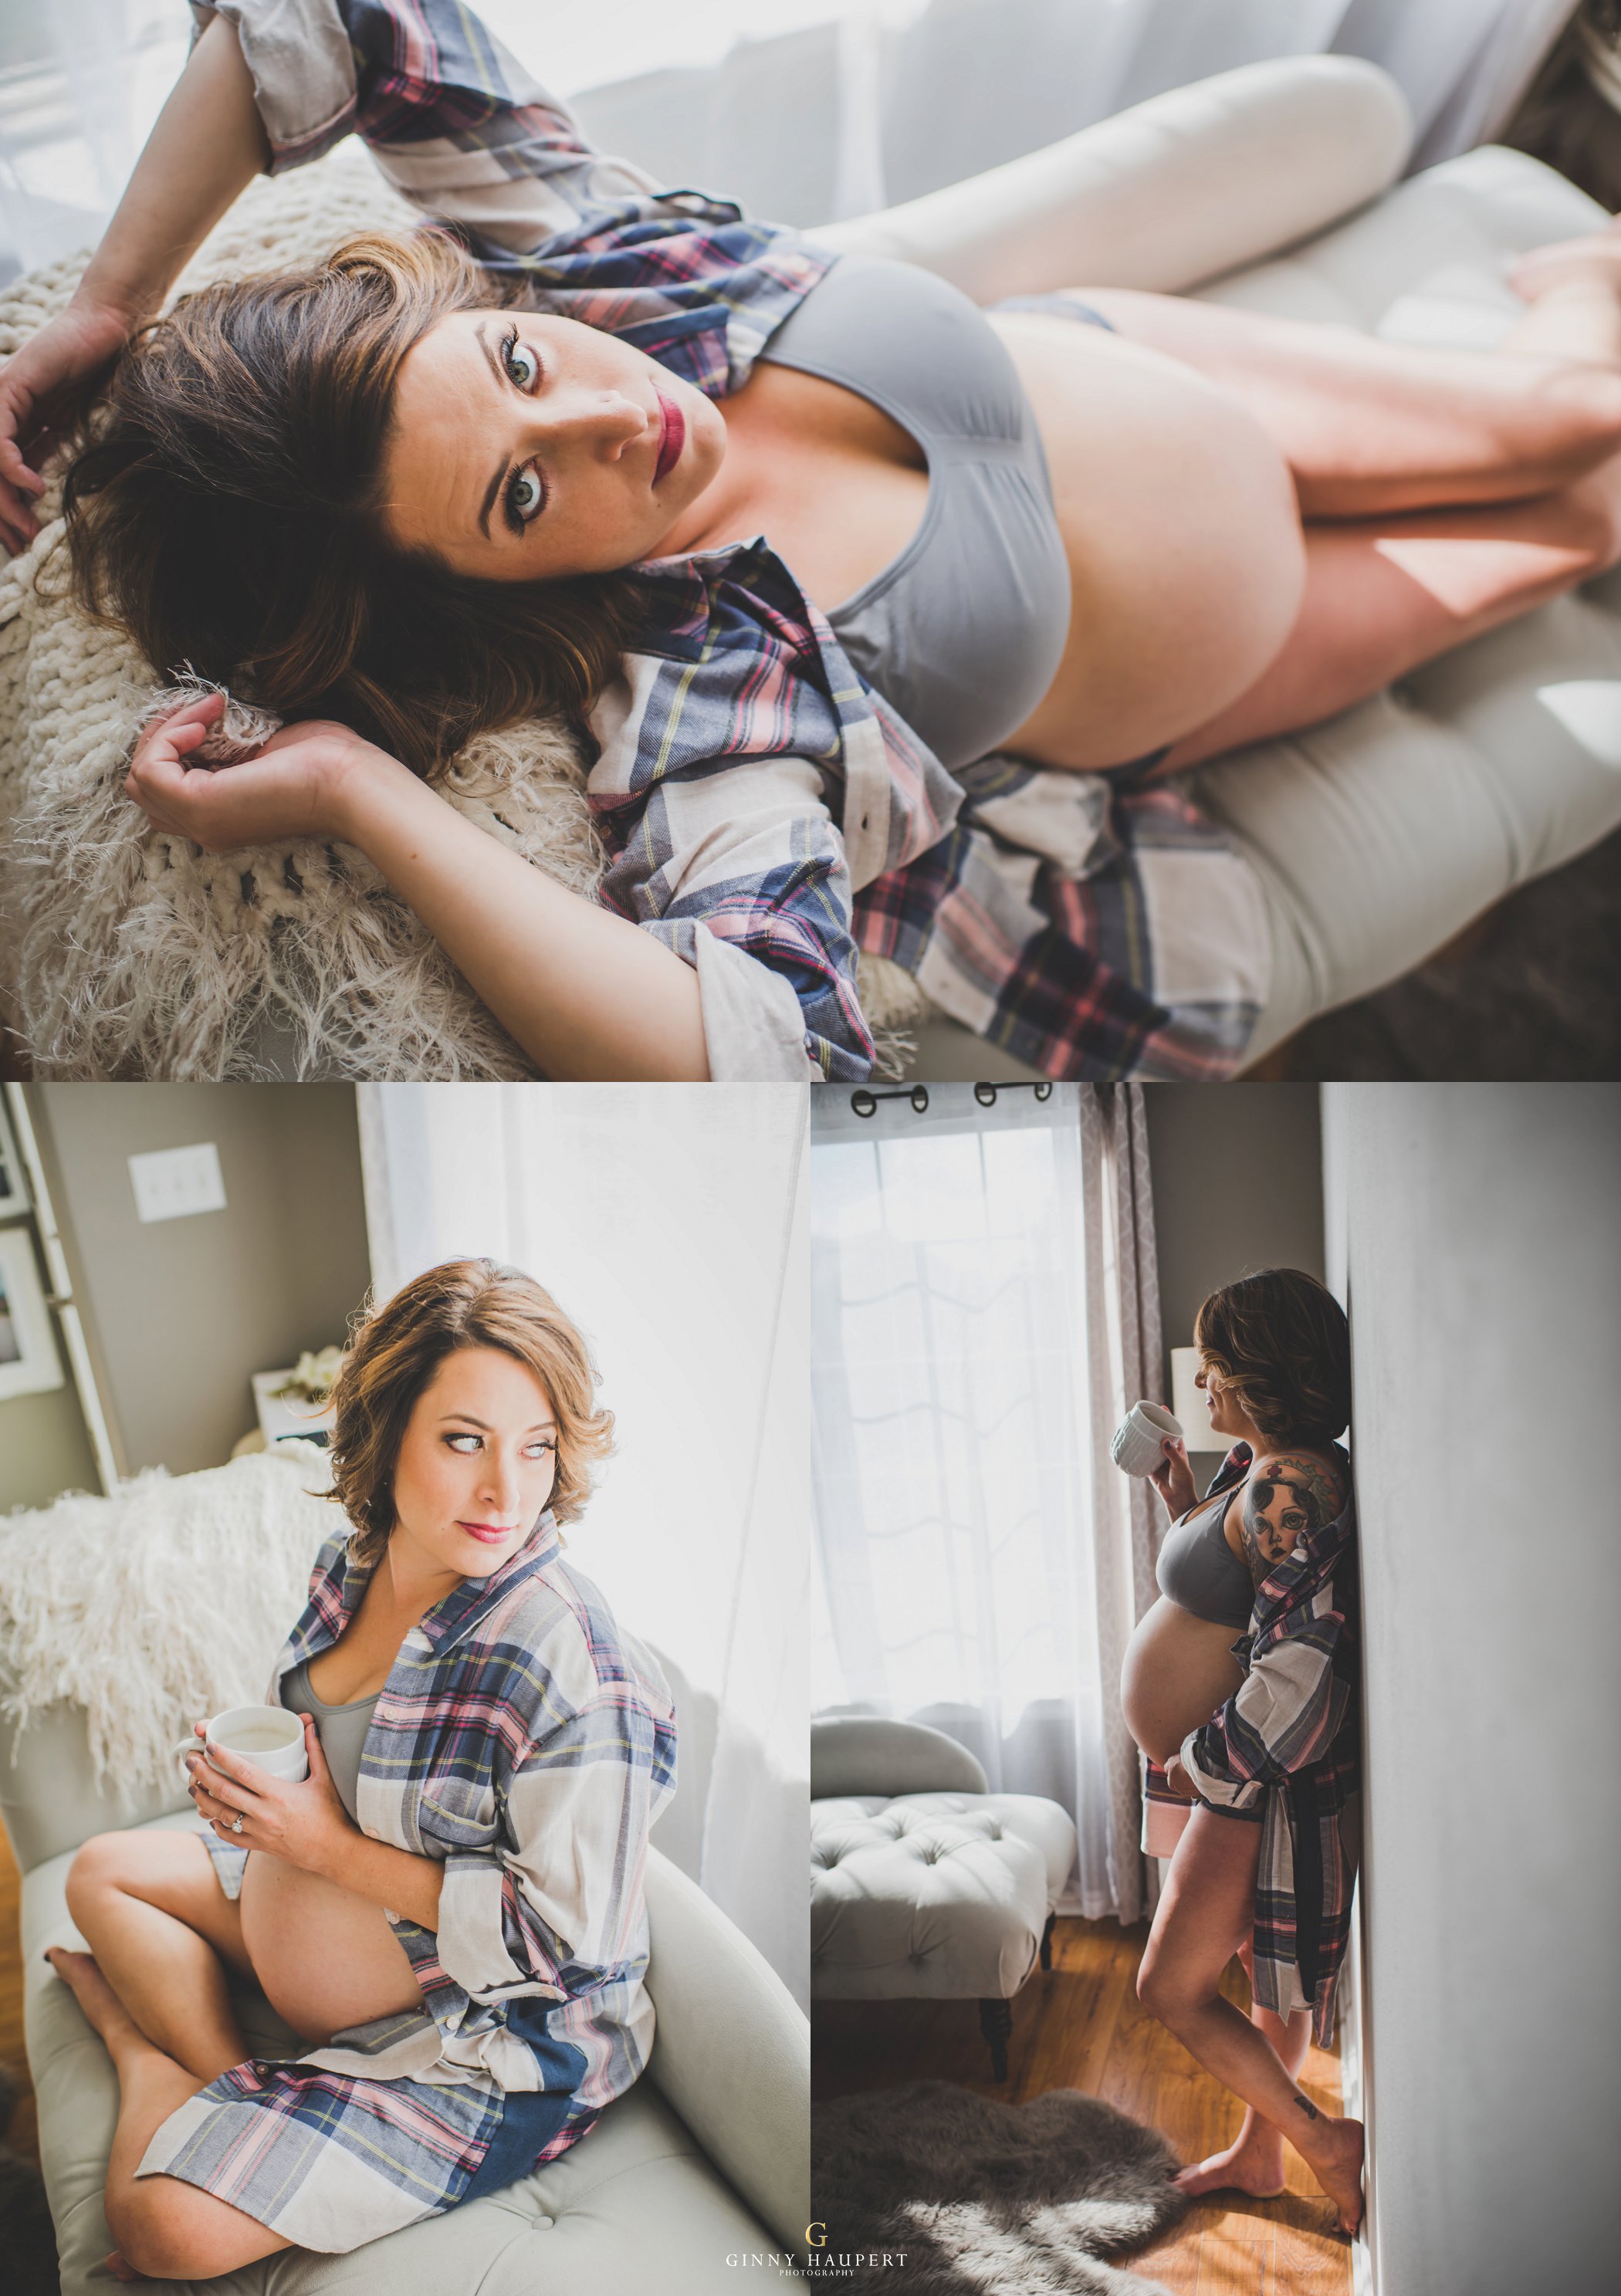 What Is a Boudoir Maternity Session? - Miette Photography